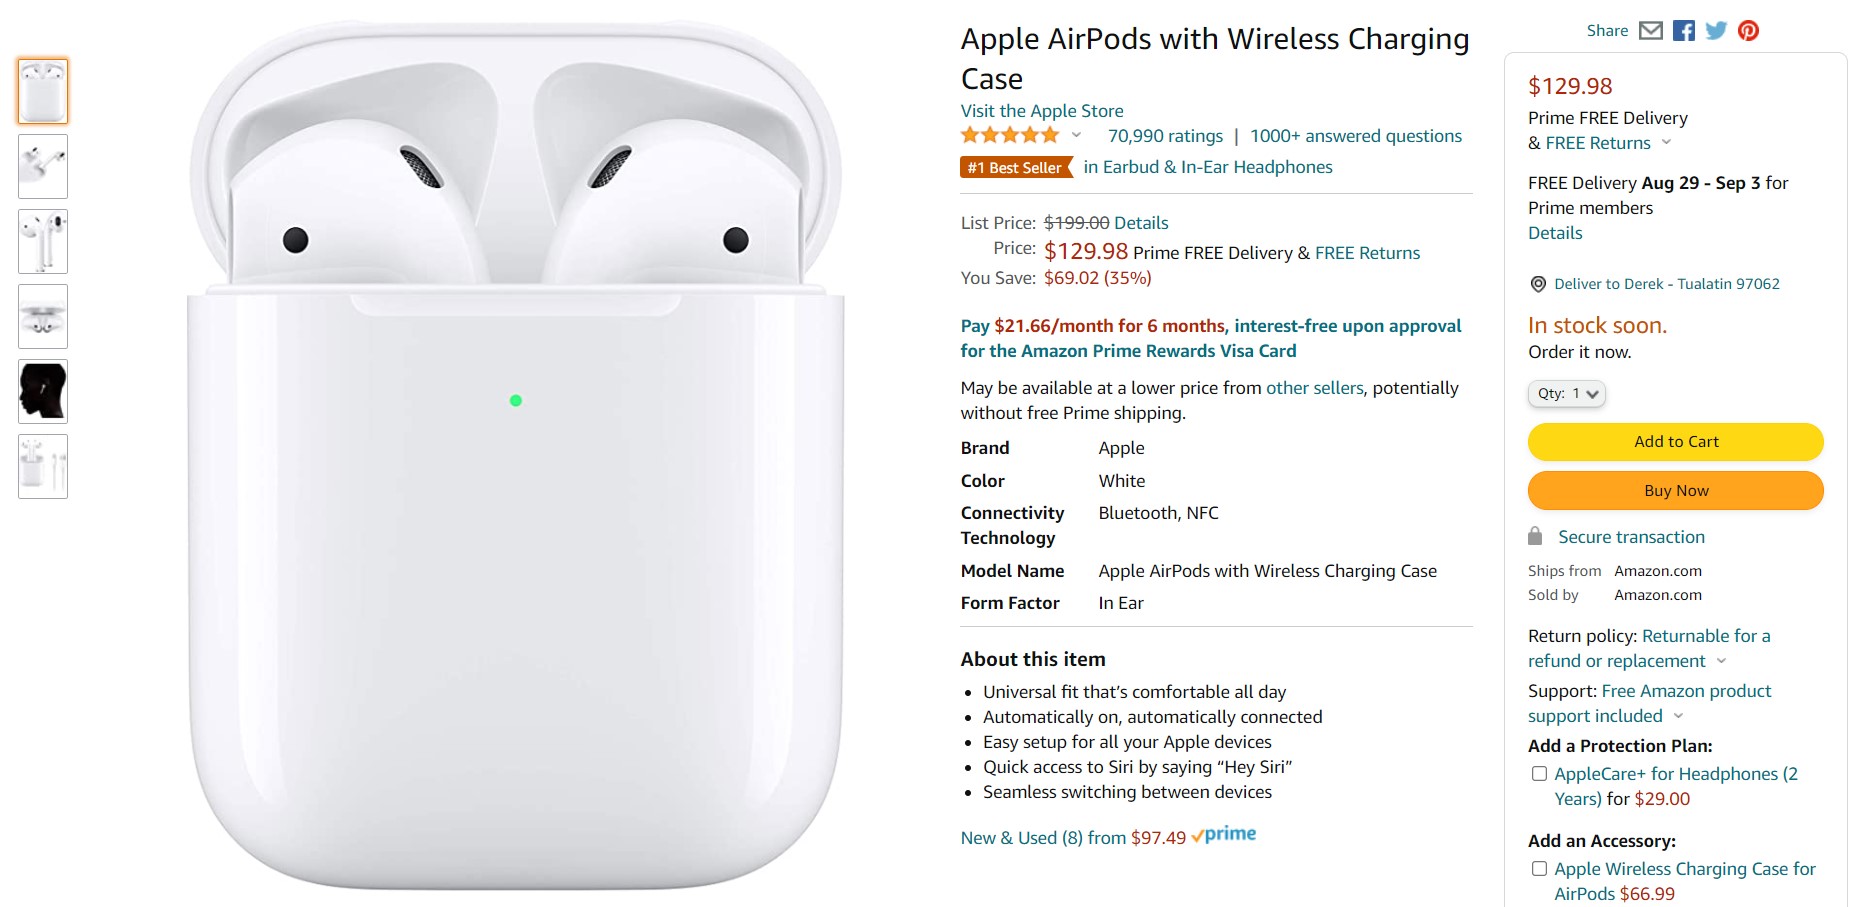 Amazon offer for Apple AirPods with wireless charging case